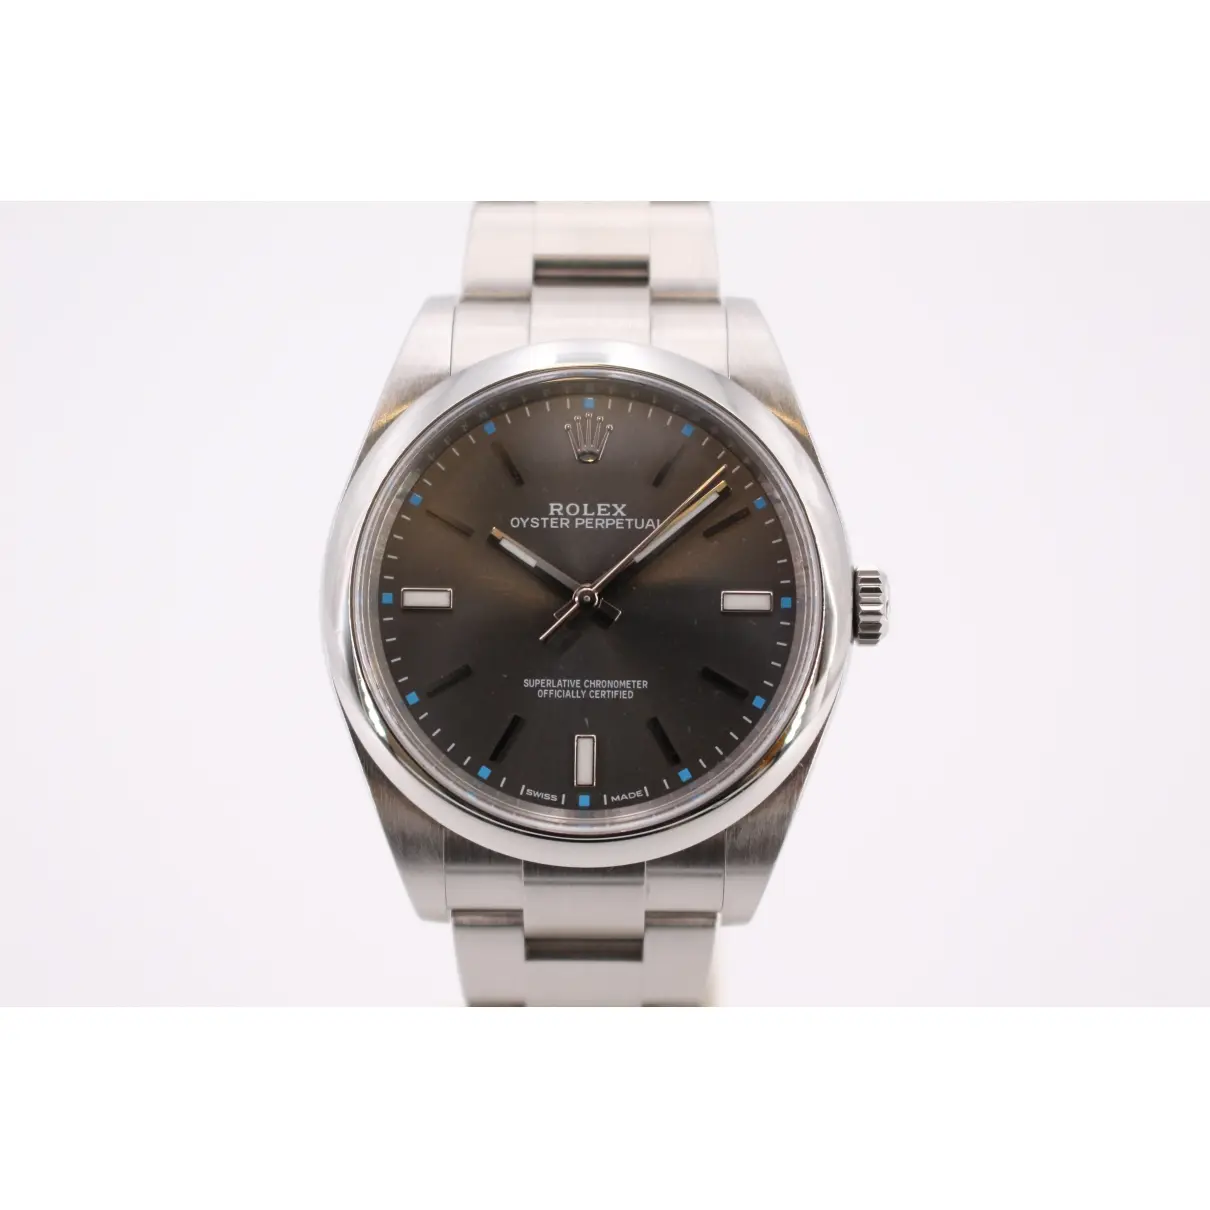 Oyster Perpetual 39mm watch Rolex